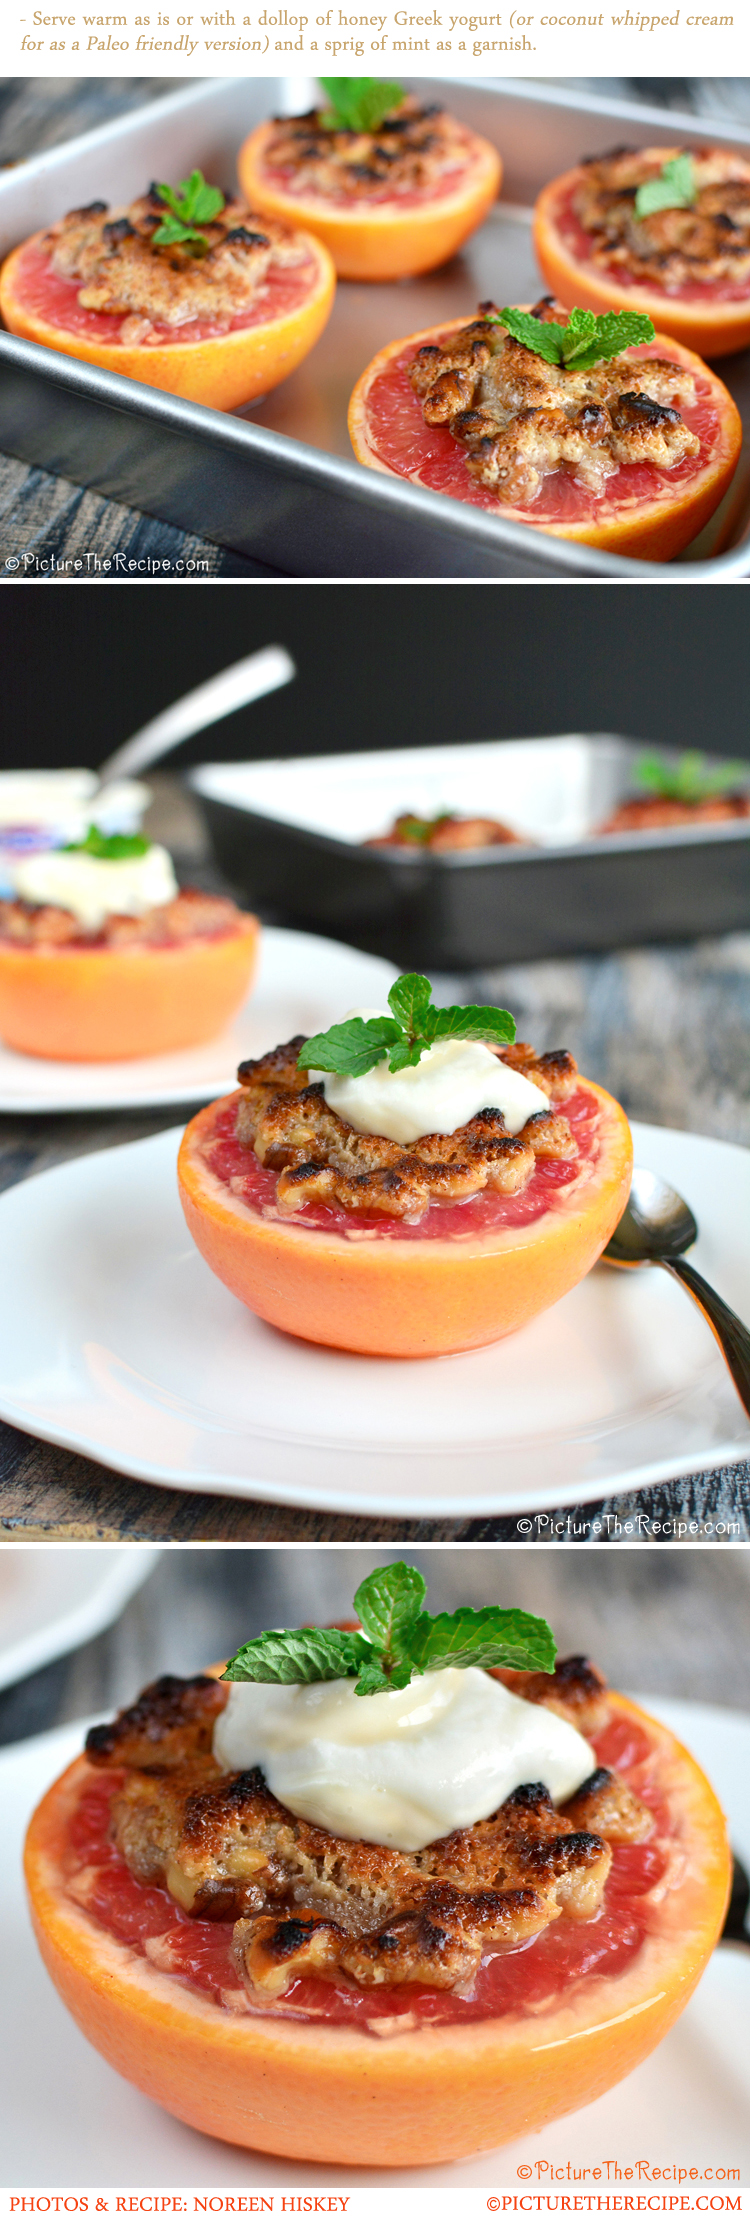 Broiled Grapefruit with Gluten-Free Streusel Recipe by PictureTheRecipe